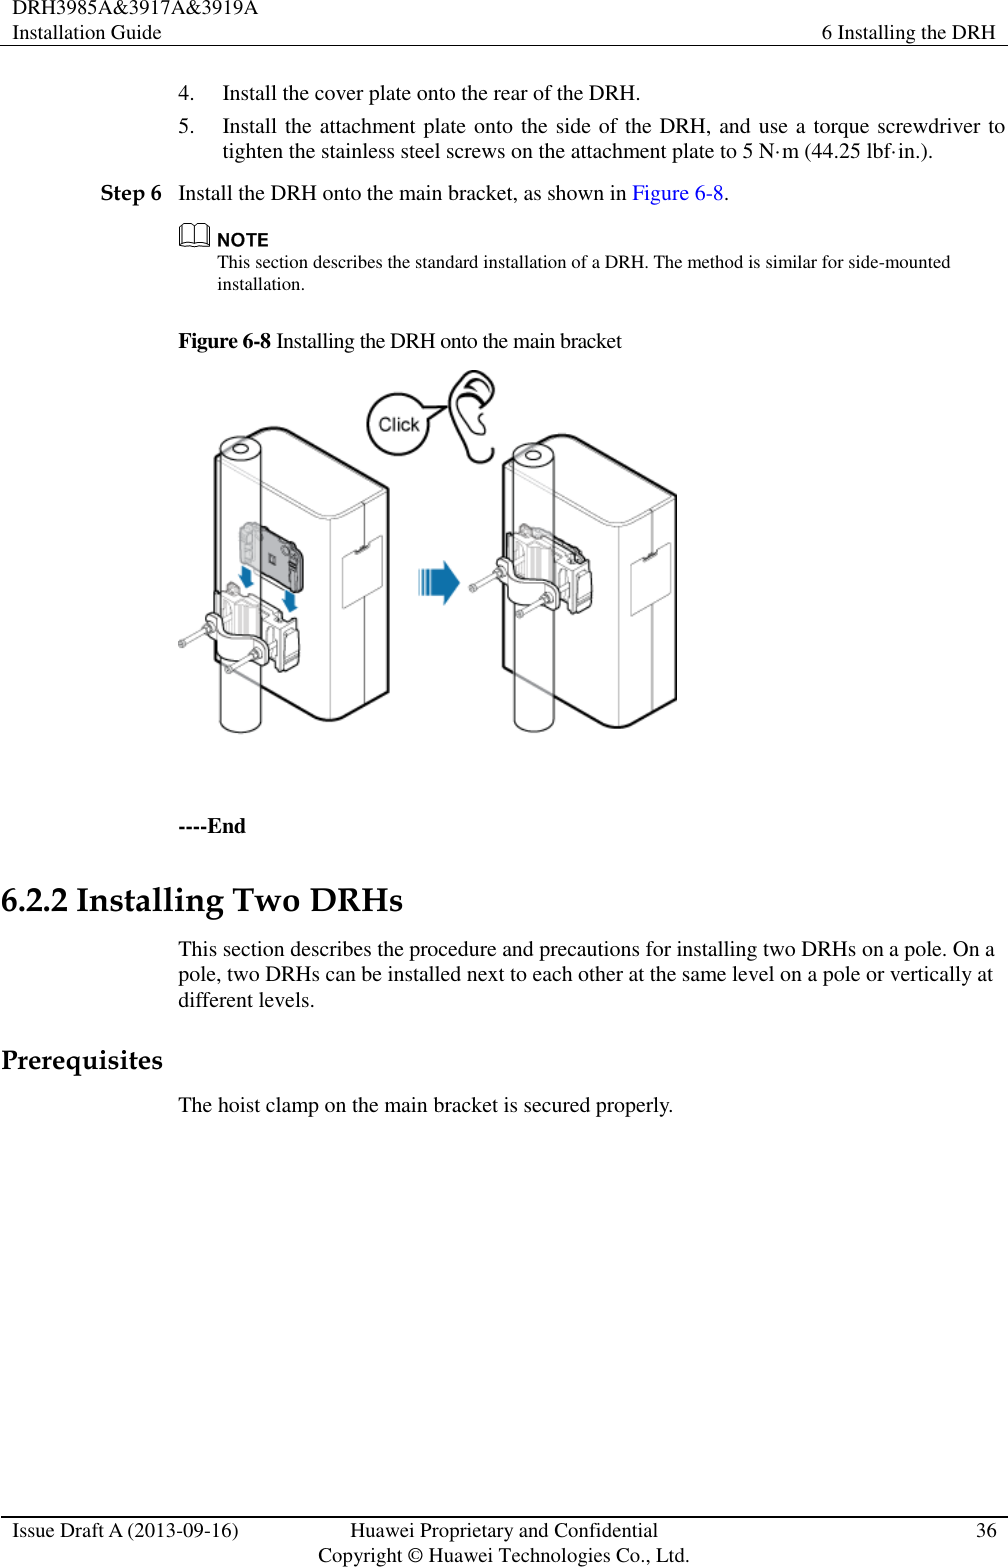 DRH3985A&amp;3917A&amp;3919A Installation Guide 6 Installing the DRH  Issue Draft A (2013-09-16) Huawei Proprietary and Confidential                                     Copyright © Huawei Technologies Co., Ltd. 36  4. Install the cover plate onto the rear of the DRH. 5. Install the attachment plate onto the side of the DRH, and use a torque screwdriver to tighten the stainless steel screws on the attachment plate to 5 N·m (44.25 lbf·in.). Step 6 Install the DRH onto the main bracket, as shown in Figure 6-8.  This section describes the standard installation of a DRH. The method is similar for side-mounted installation. Figure 6-8 Installing the DRH onto the main bracket   ----End 6.2.2 Installing Two DRHs This section describes the procedure and precautions for installing two DRHs on a pole. On a pole, two DRHs can be installed next to each other at the same level on a pole or vertically at different levels. Prerequisites The hoist clamp on the main bracket is secured properly.  